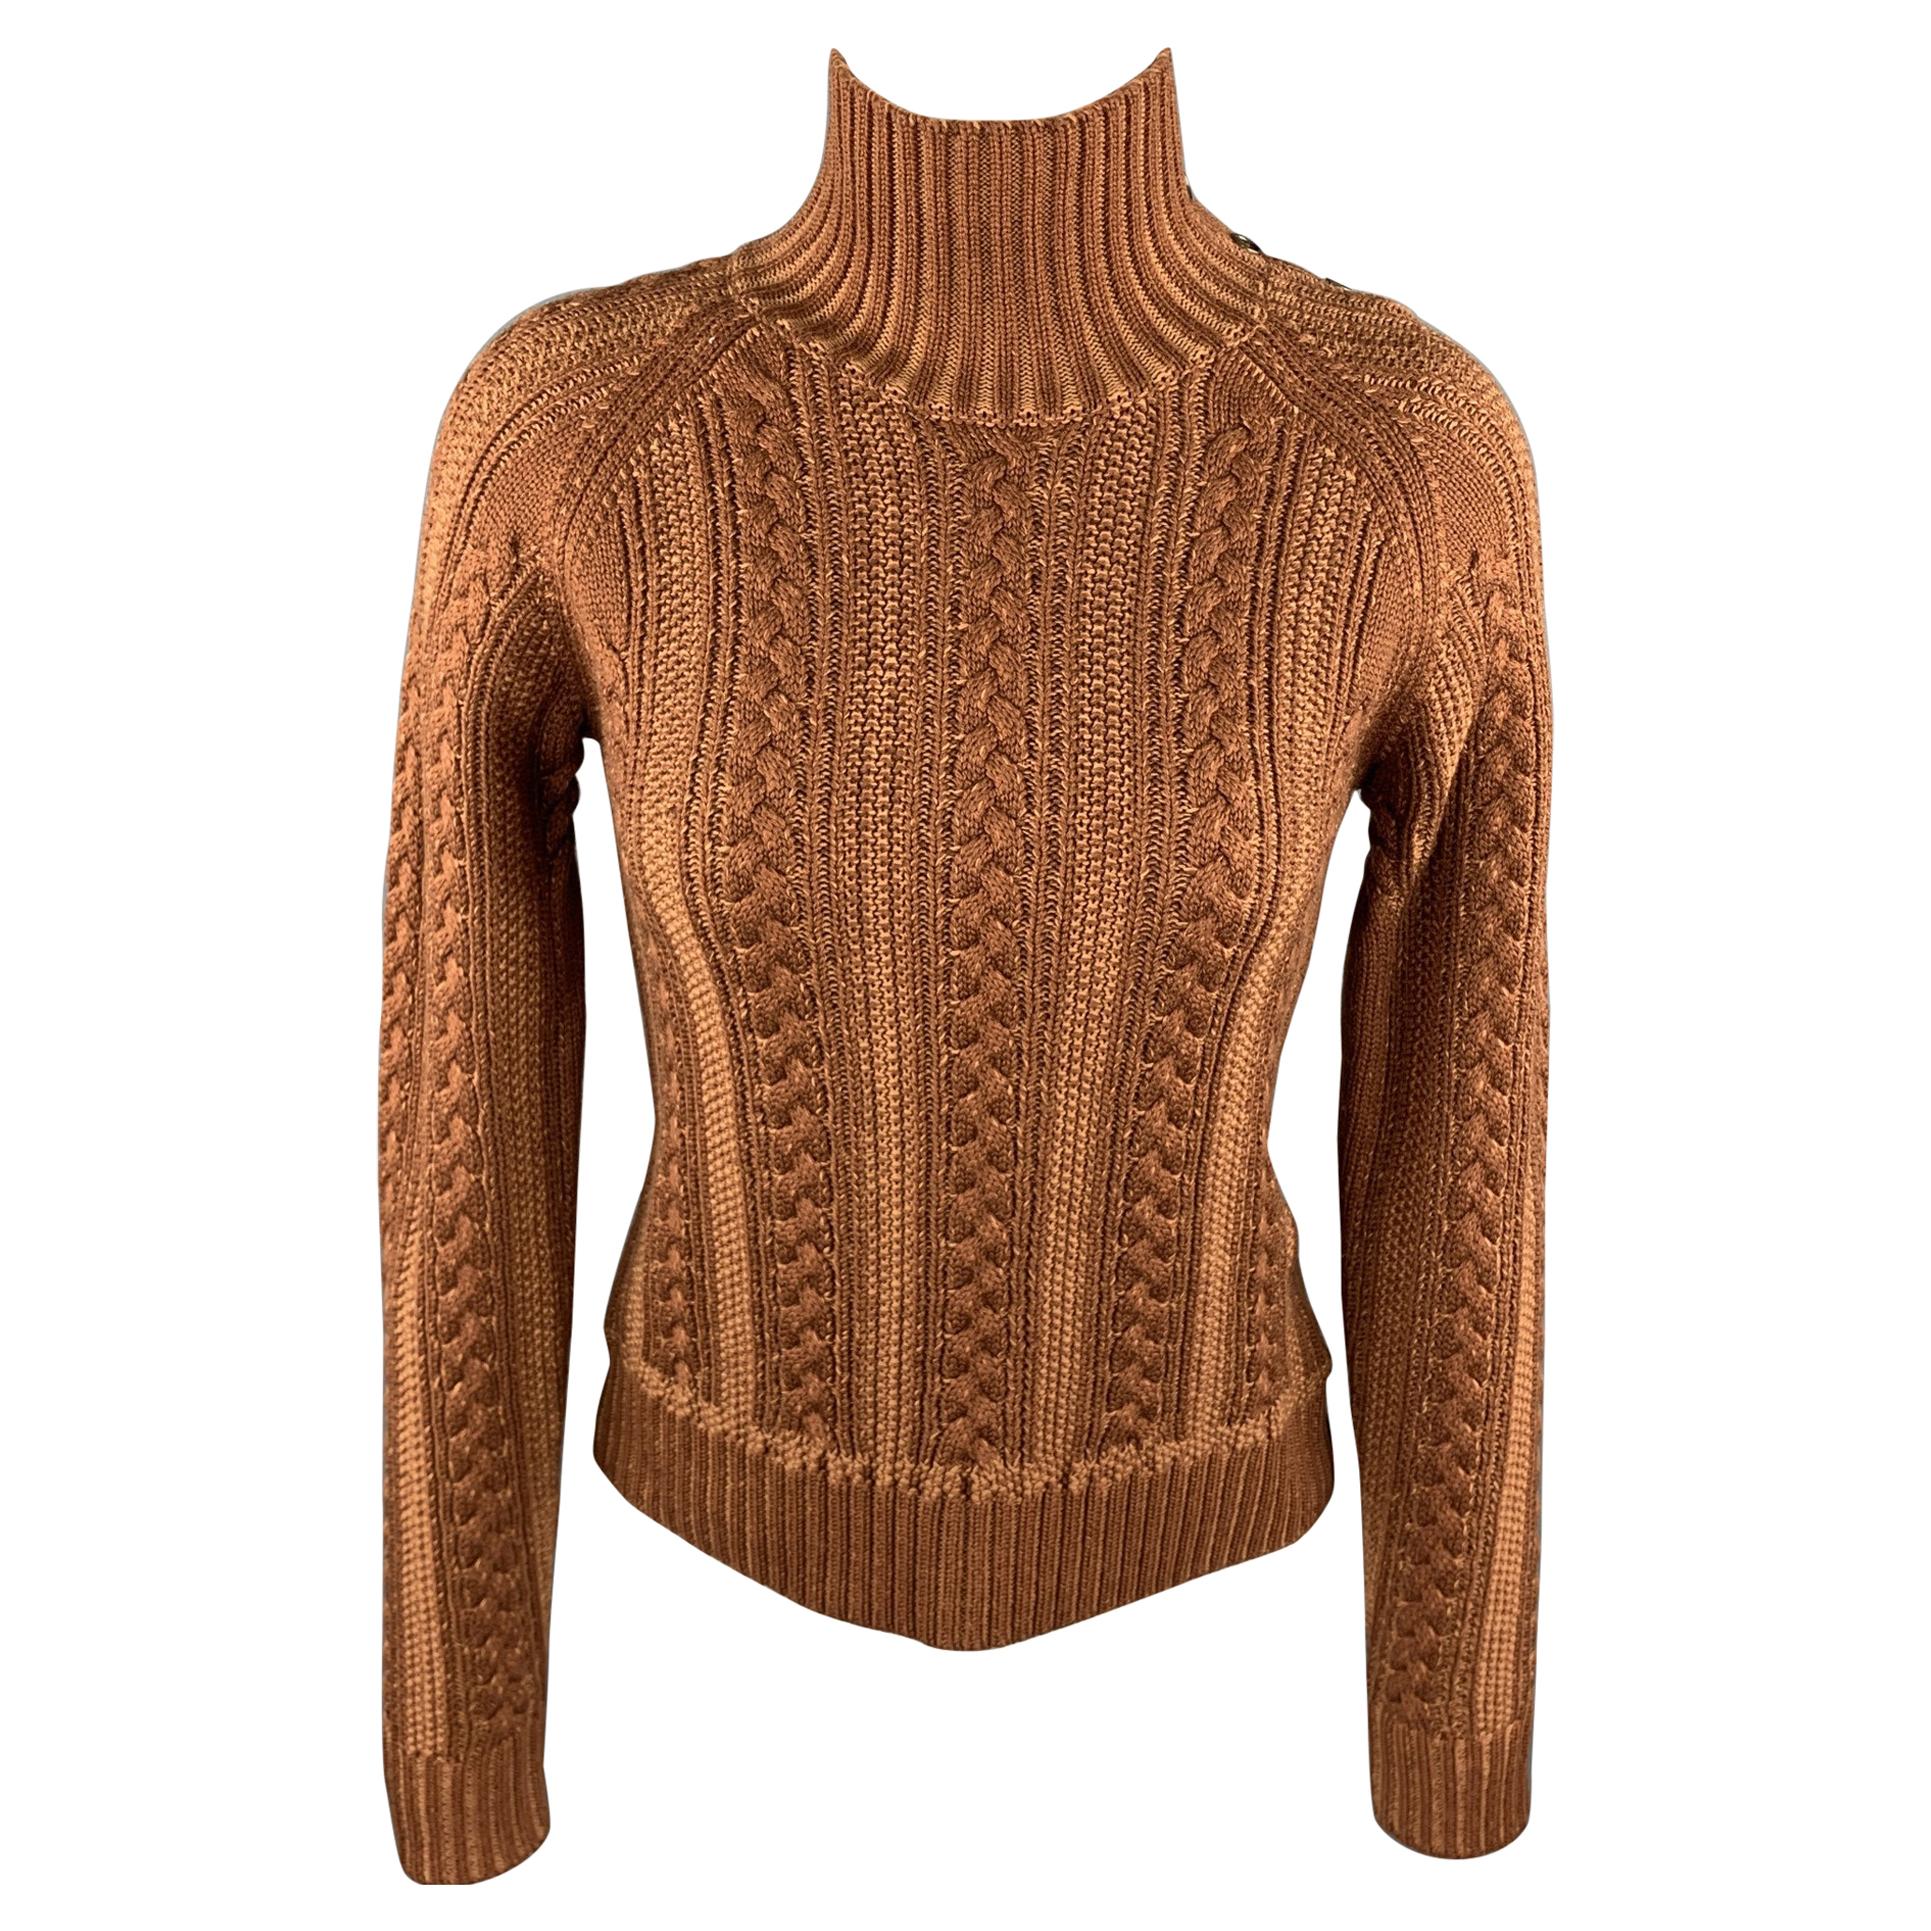 BURBERRY Size M Brown Cable Knit Wool / Cotton High Collar Sweater